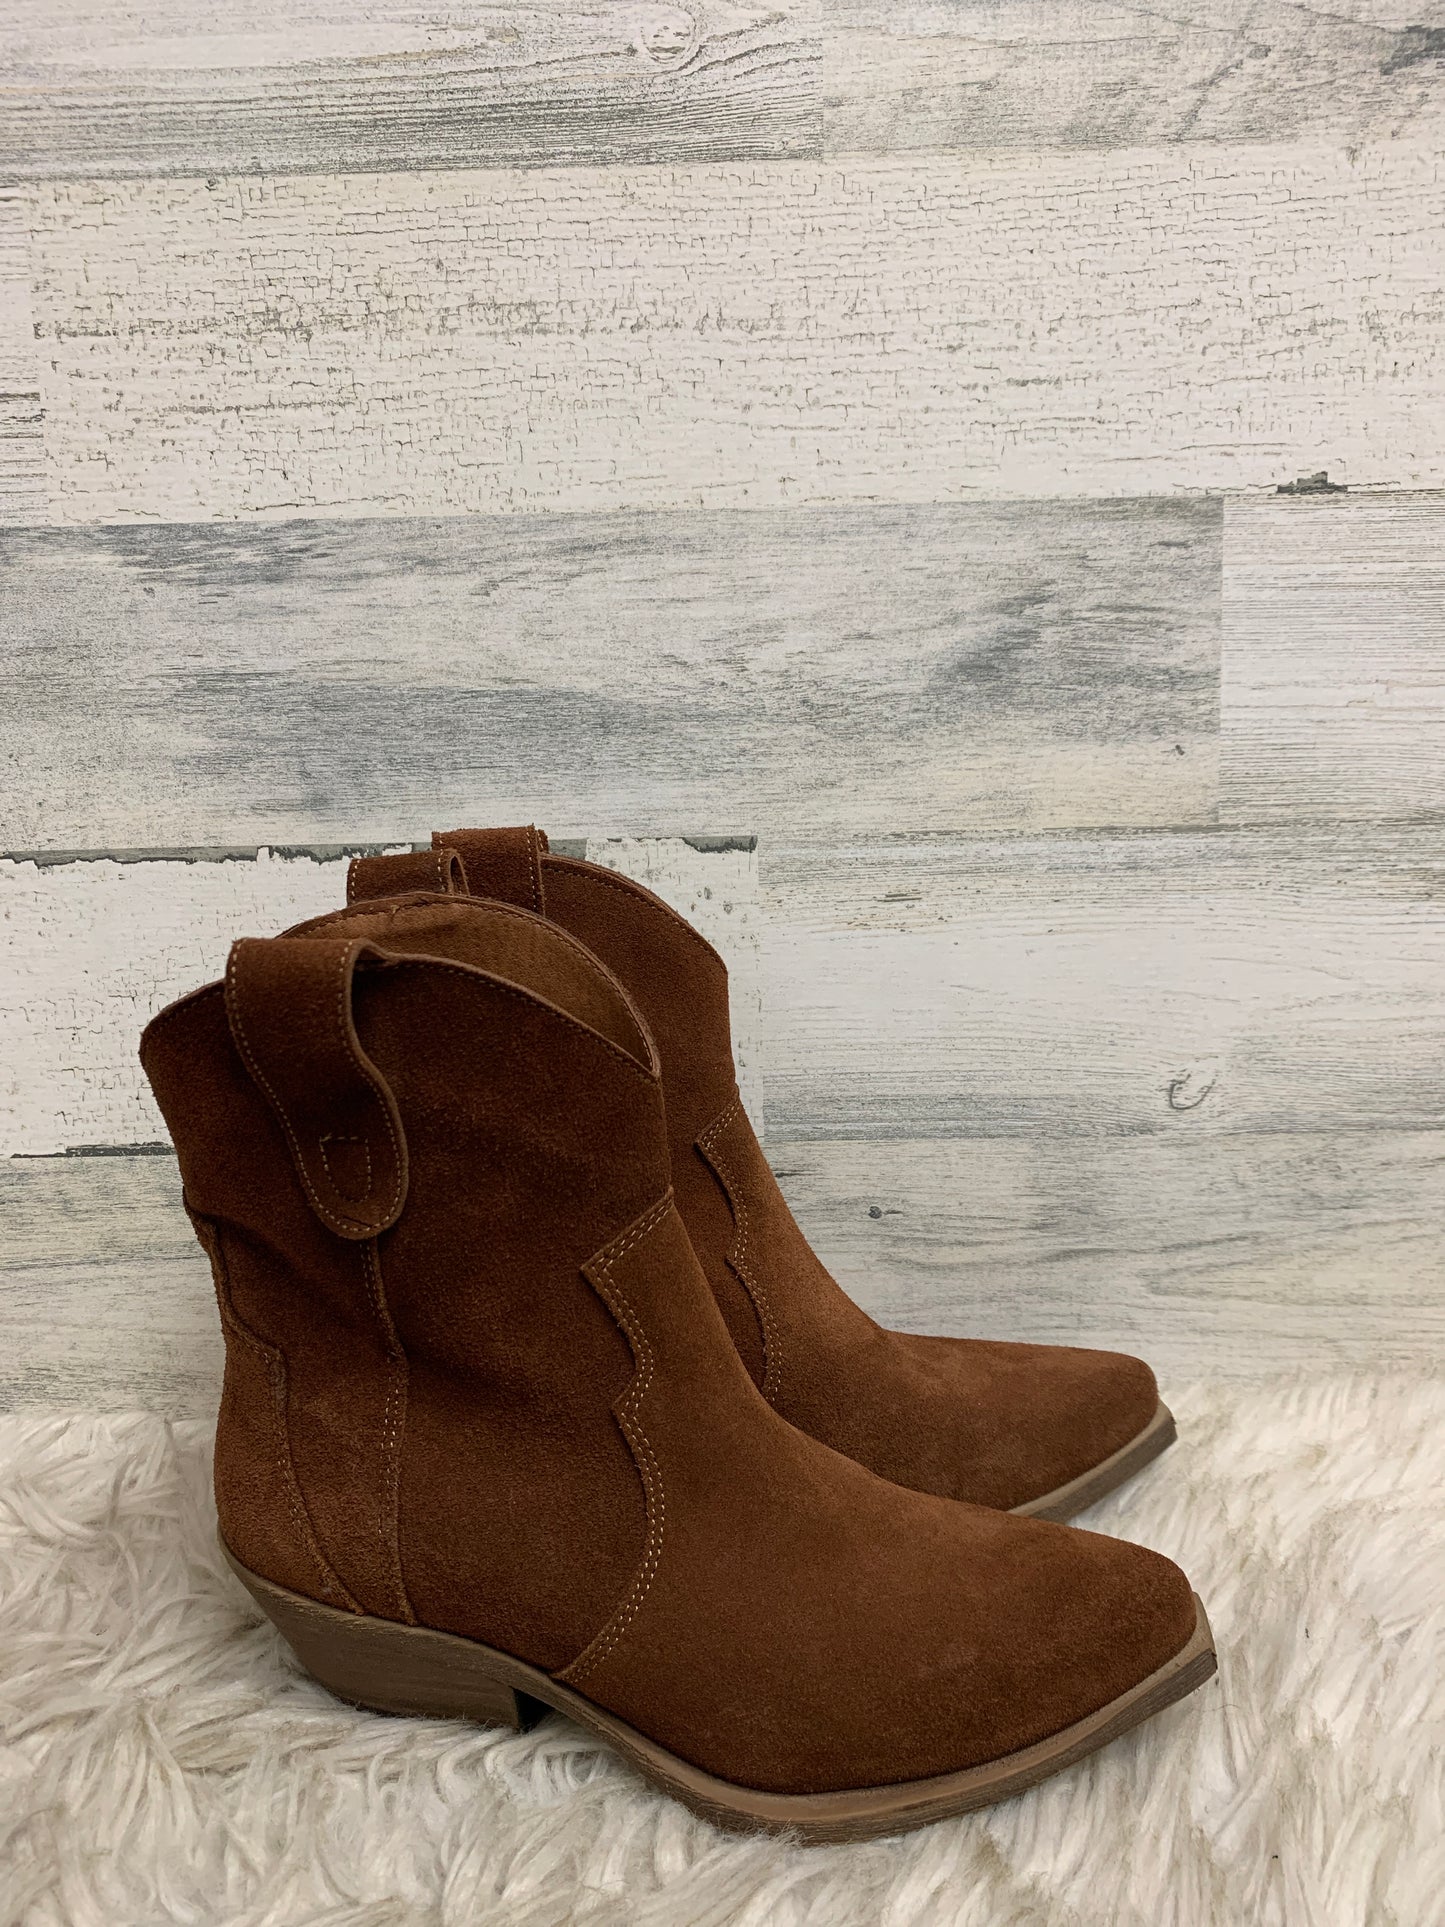 Boots Ankle Heels By Steve Madden  Size: 6